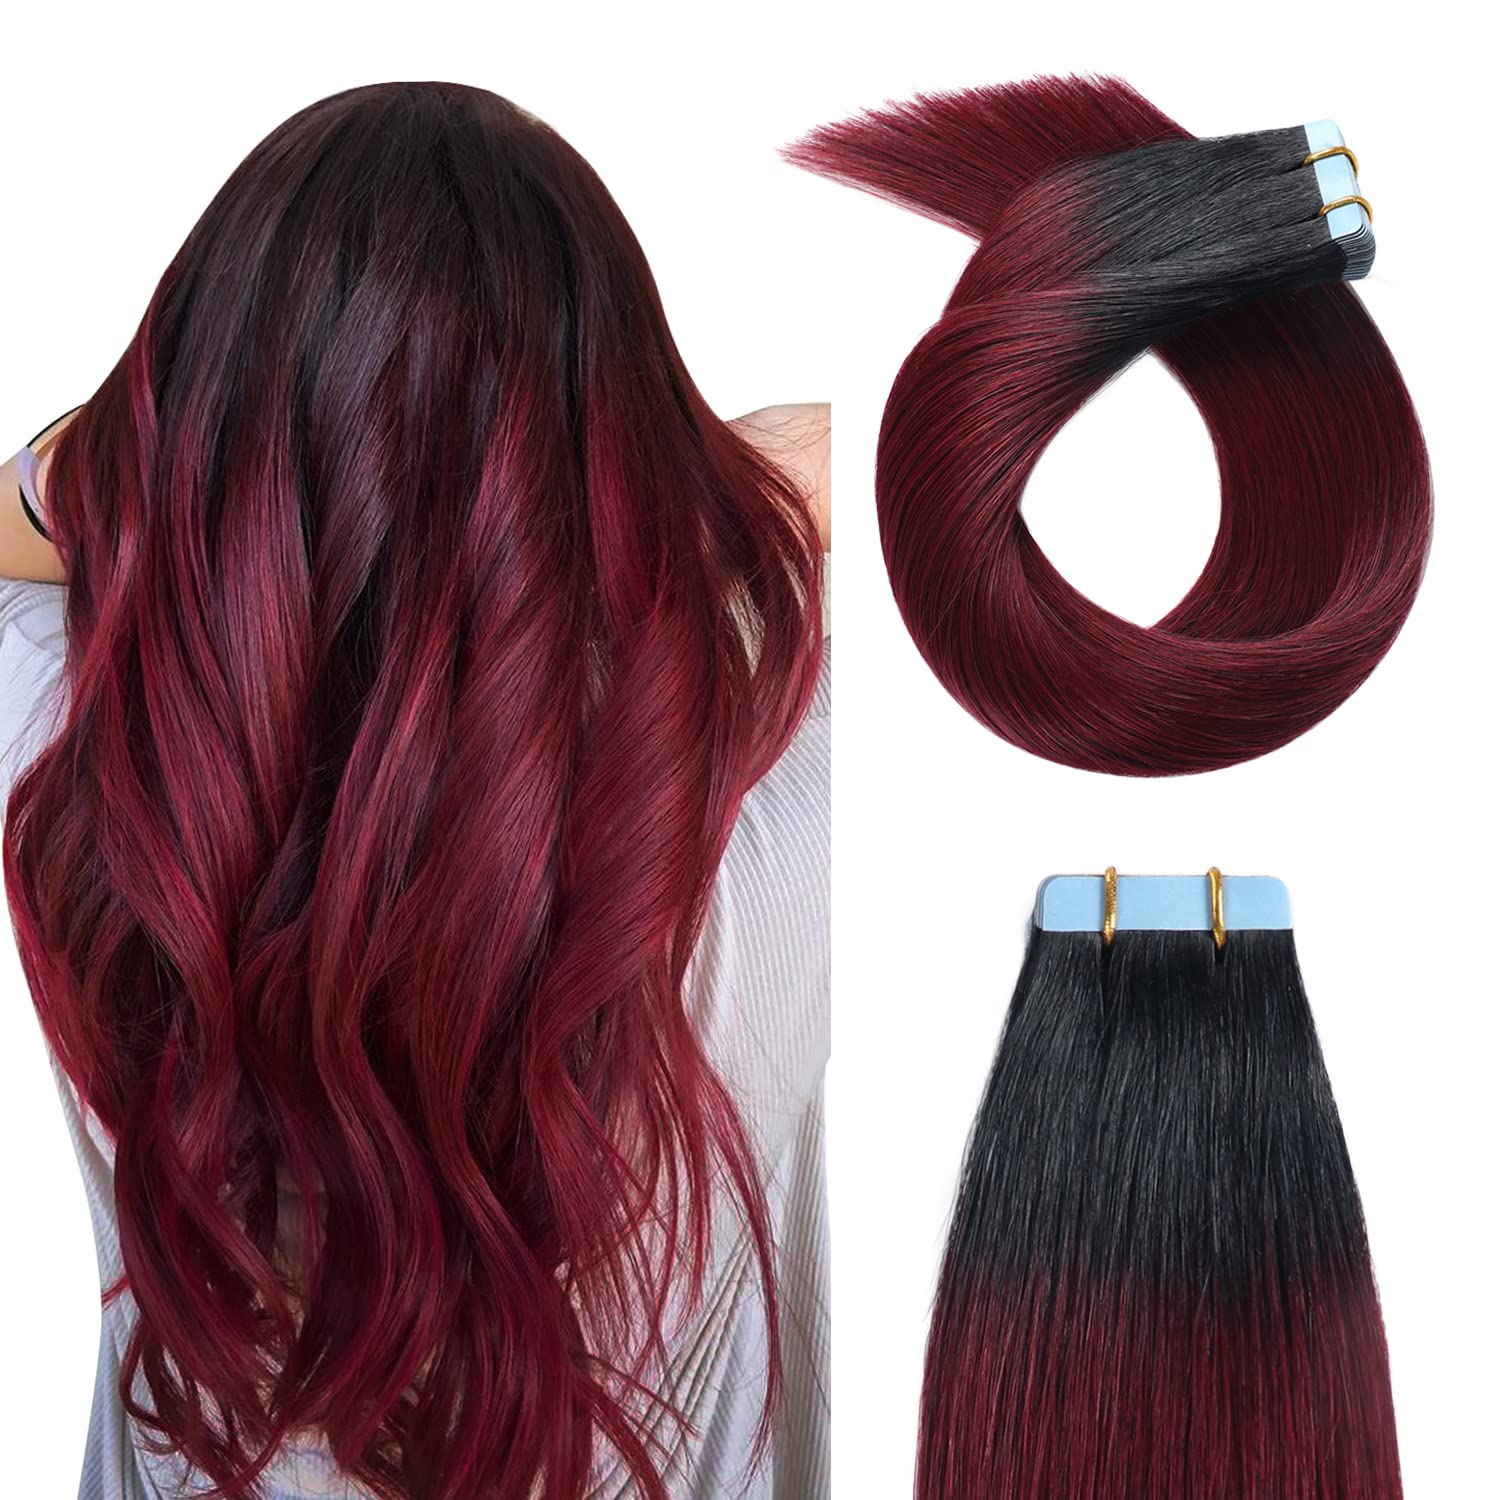 Burgundy Hair Extensions, Human Hair Tape in Hair Extensions Balayage 12Inch-24inch Black Rooted Hair Extensions Tape ins #1 Jet Black to #99J Wine Red Seamless Skin Weft Extensions 20pcs 50g by YILITE